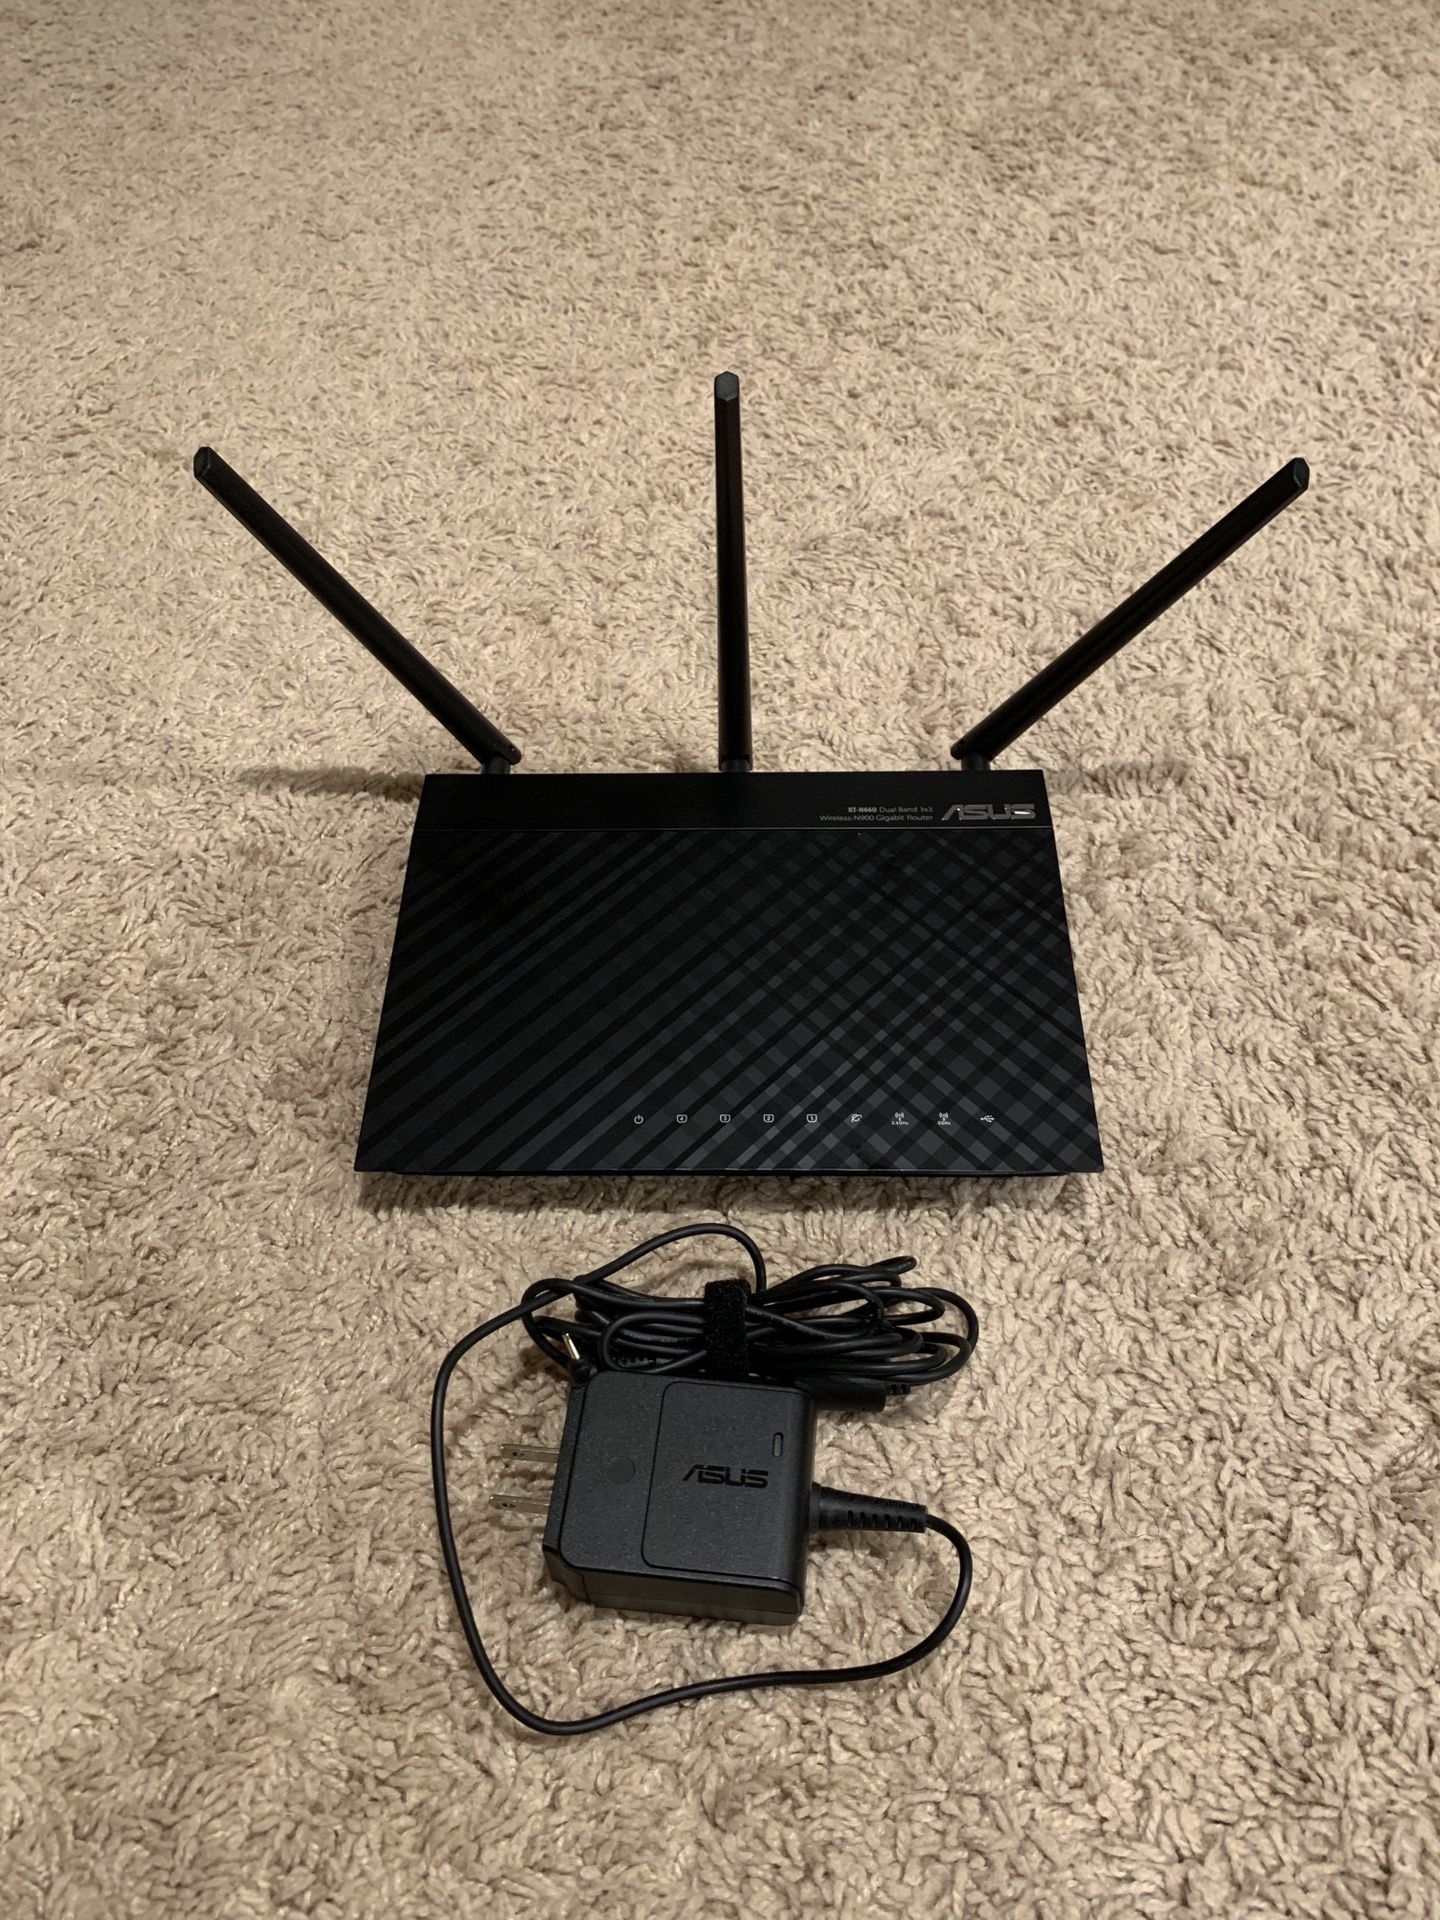 ASUS RT-N66U 450 Mbps Wireless N Router - EXCELLENT CONDITION